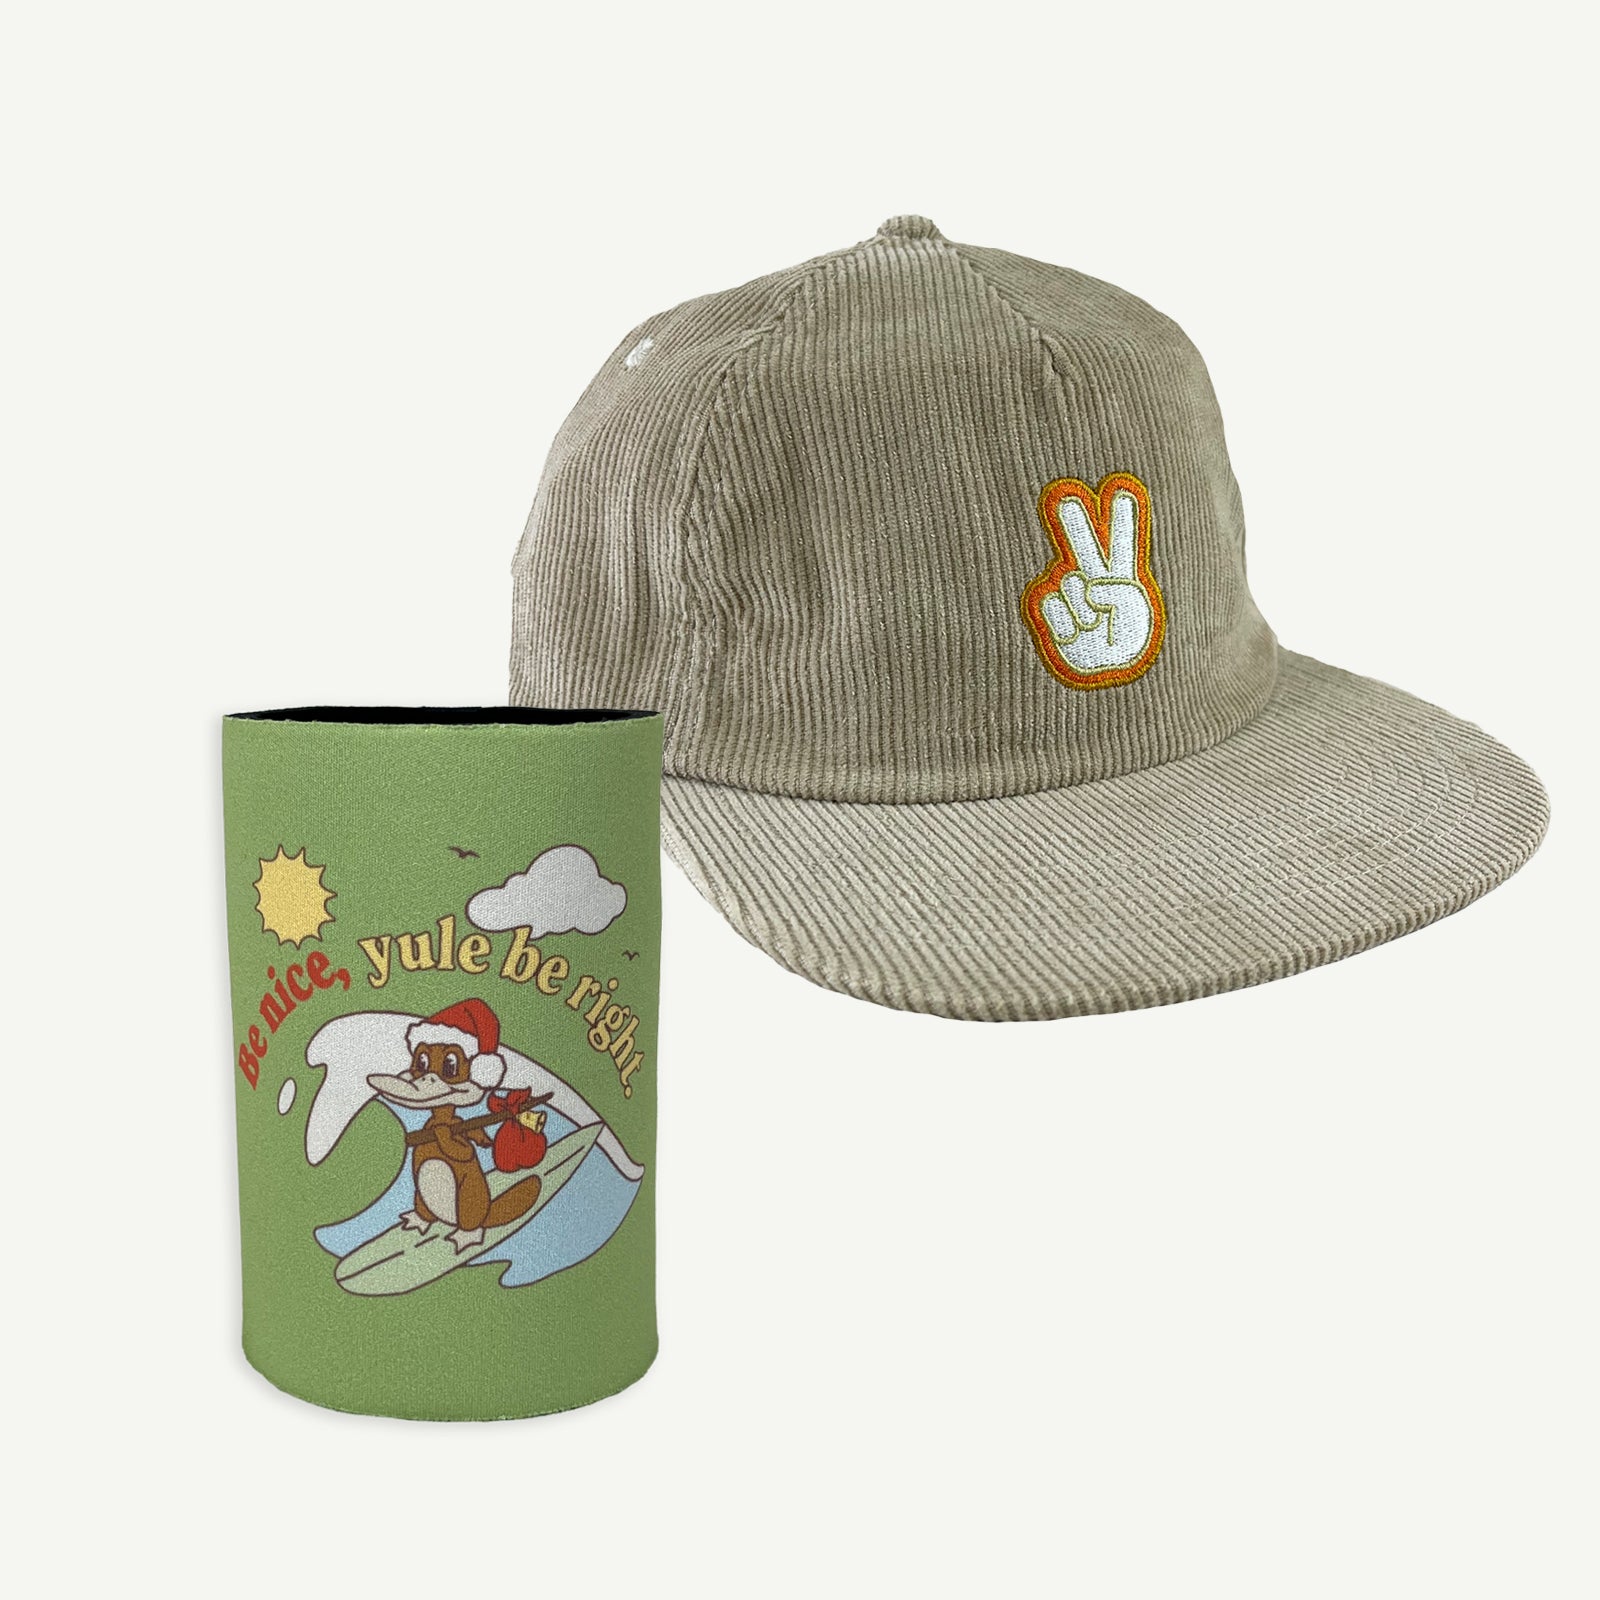 Yule Be Right Stubby Holder & Peace On Earth Cap Bundle